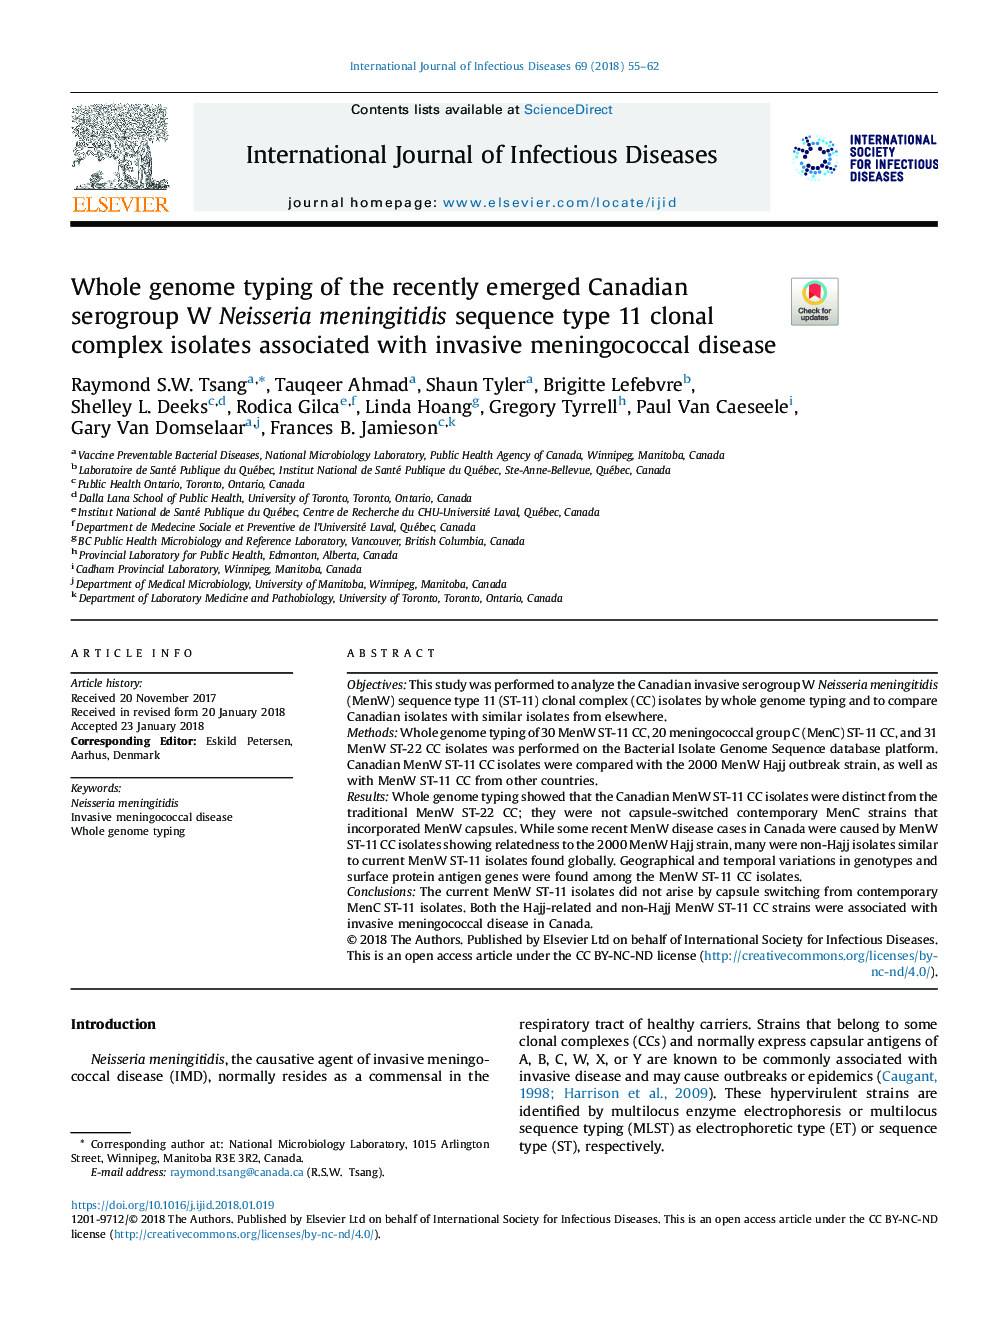 Whole genome typing of the recently emerged Canadian serogroup W Neisseria meningitidis sequence type 11 clonal complex isolates associated with invasive meningococcal disease